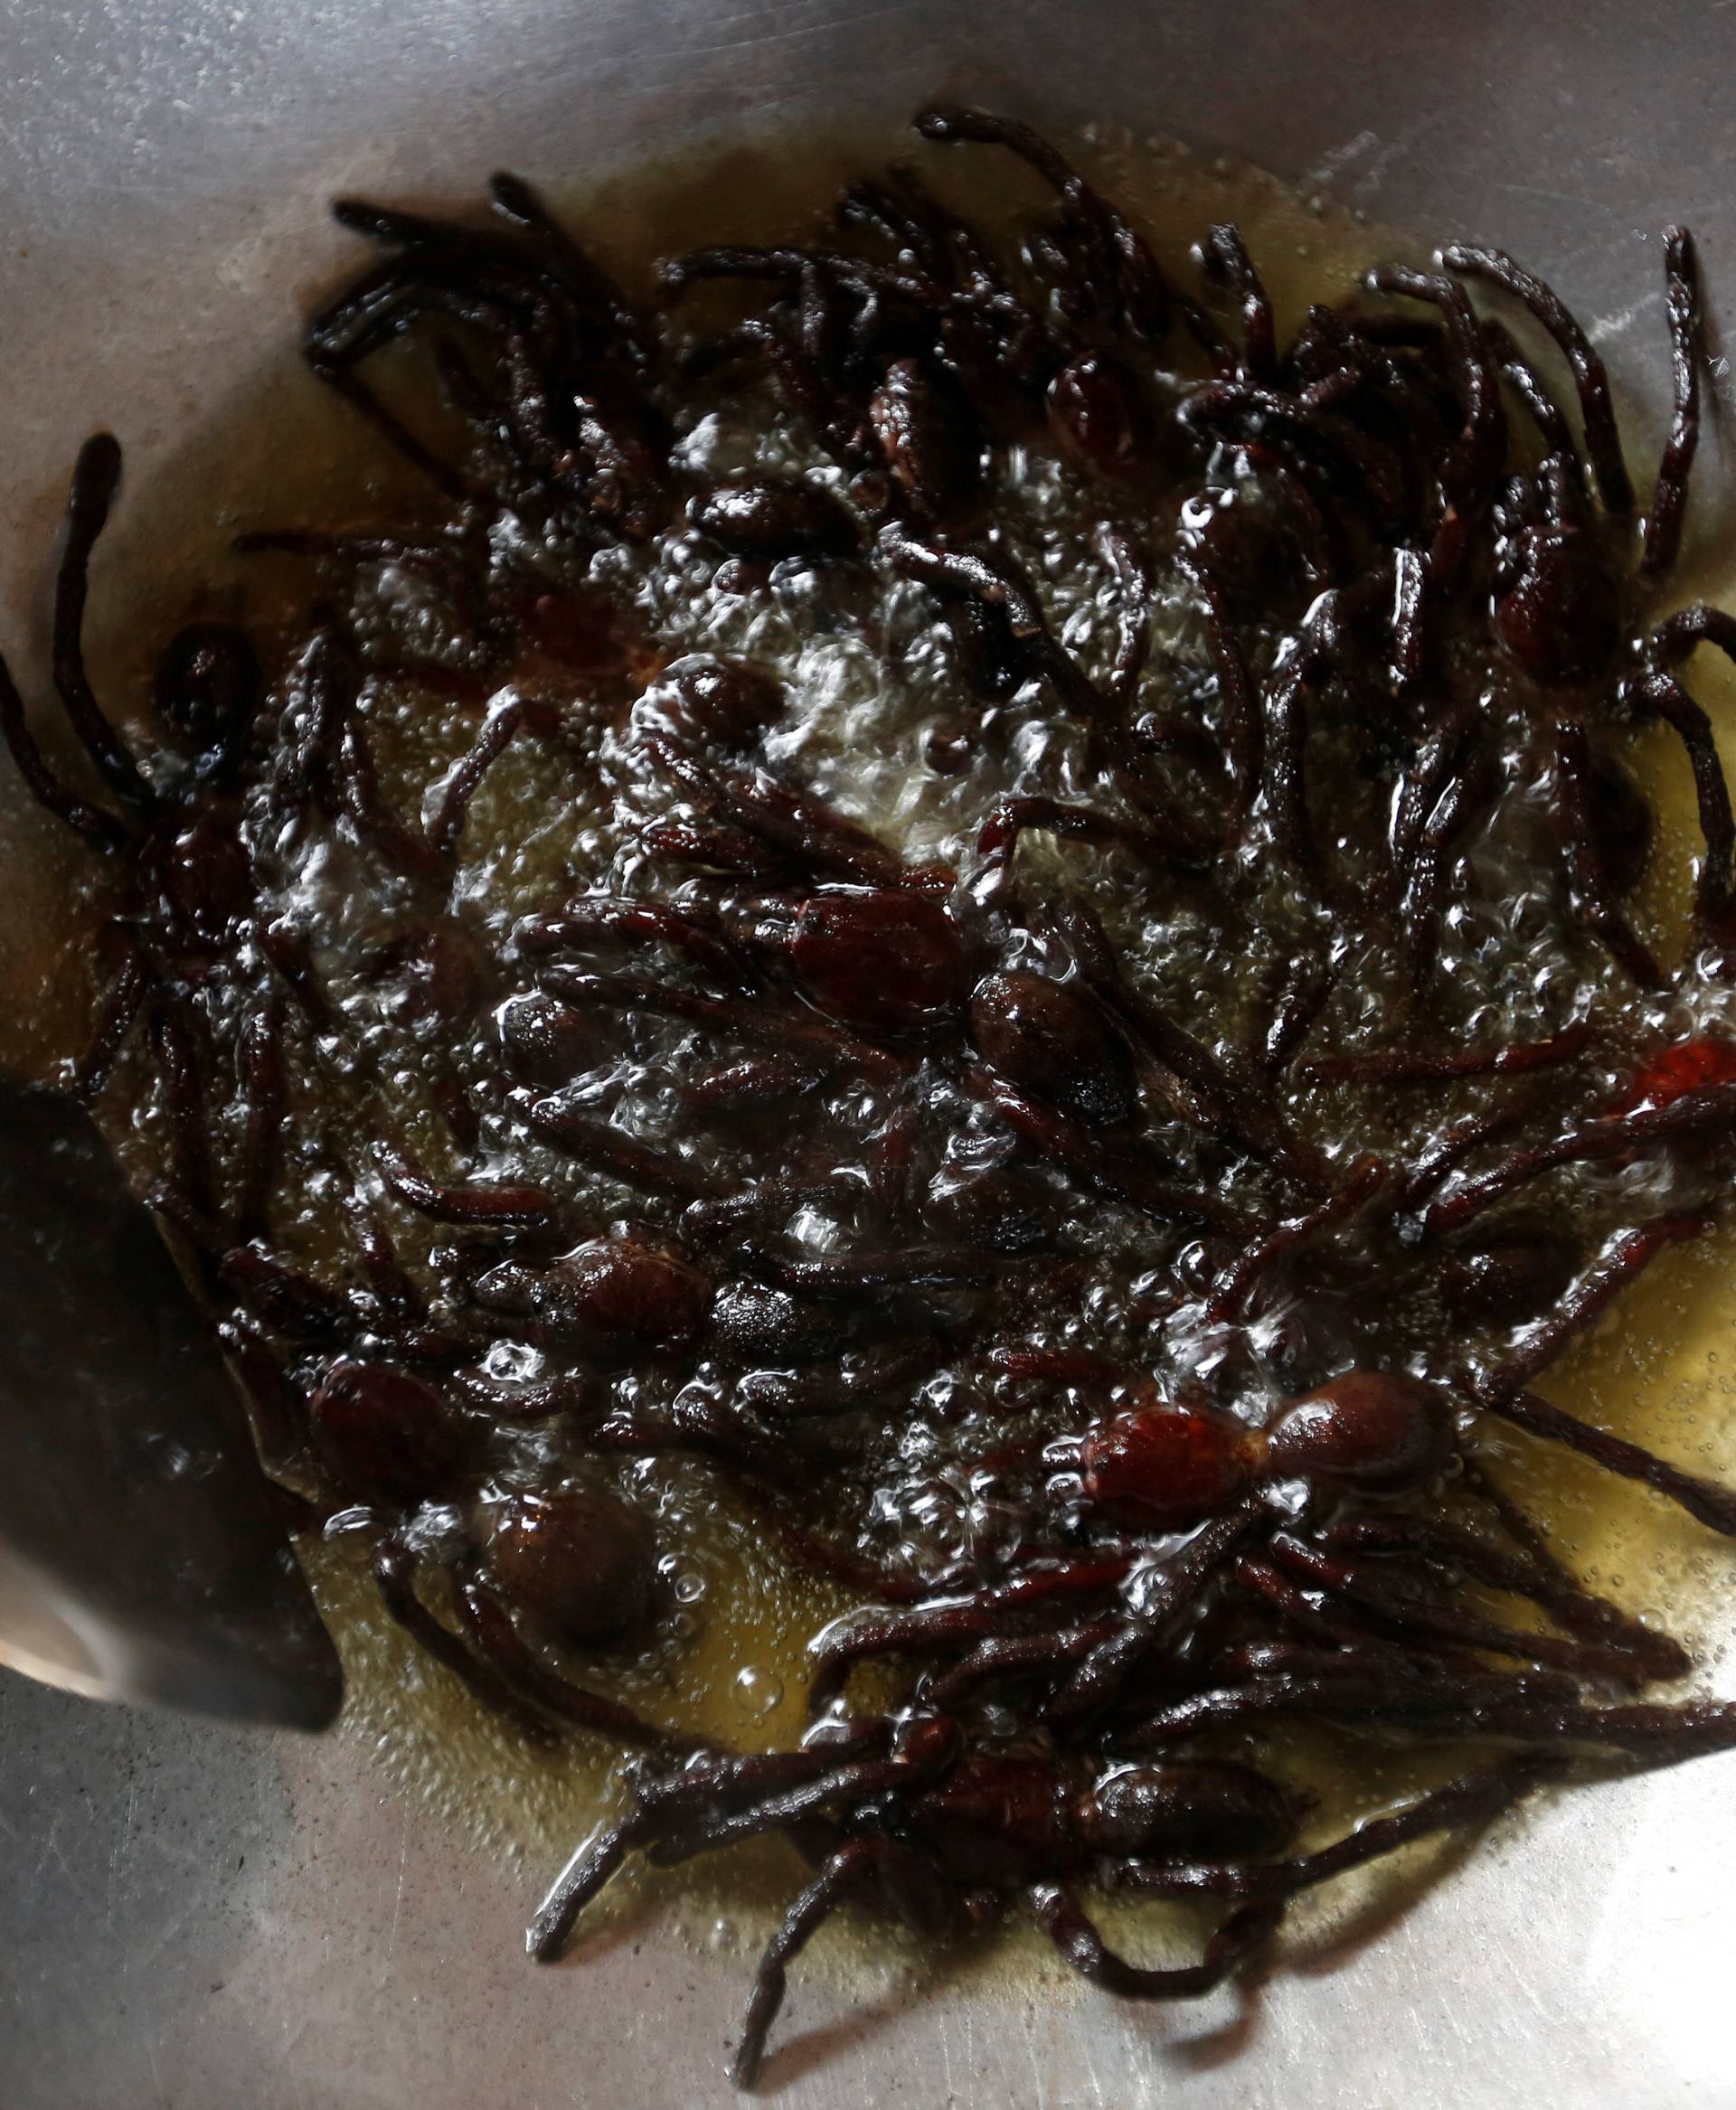 Tarantulas are fried in a pan in Kampong Cham province in Cambodia